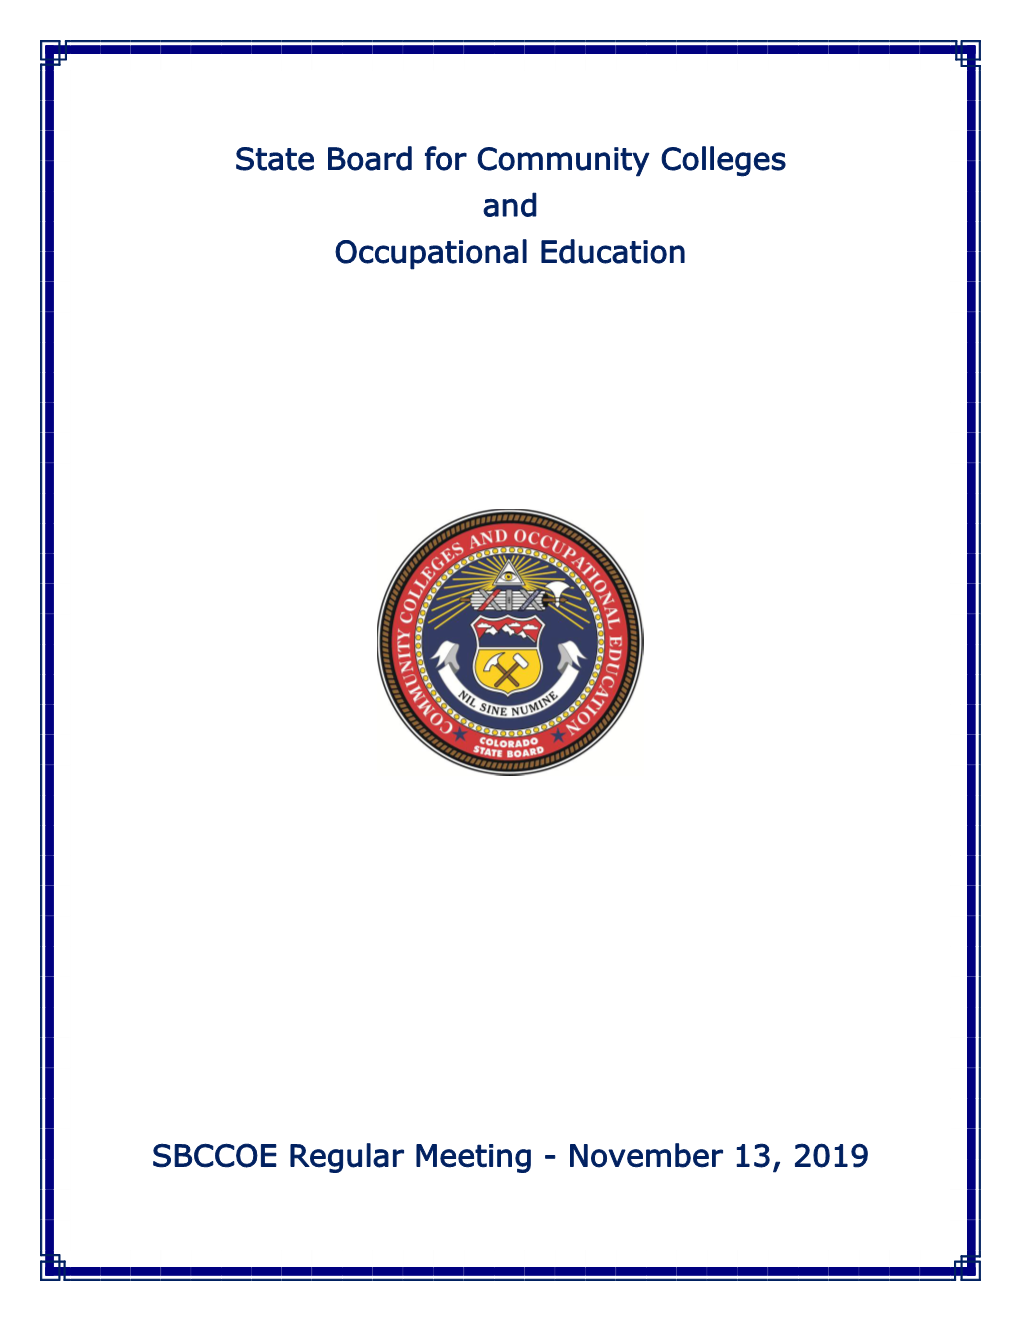 State Board for Community Colleges and Occupational Education SBCCOE Regular Meeting